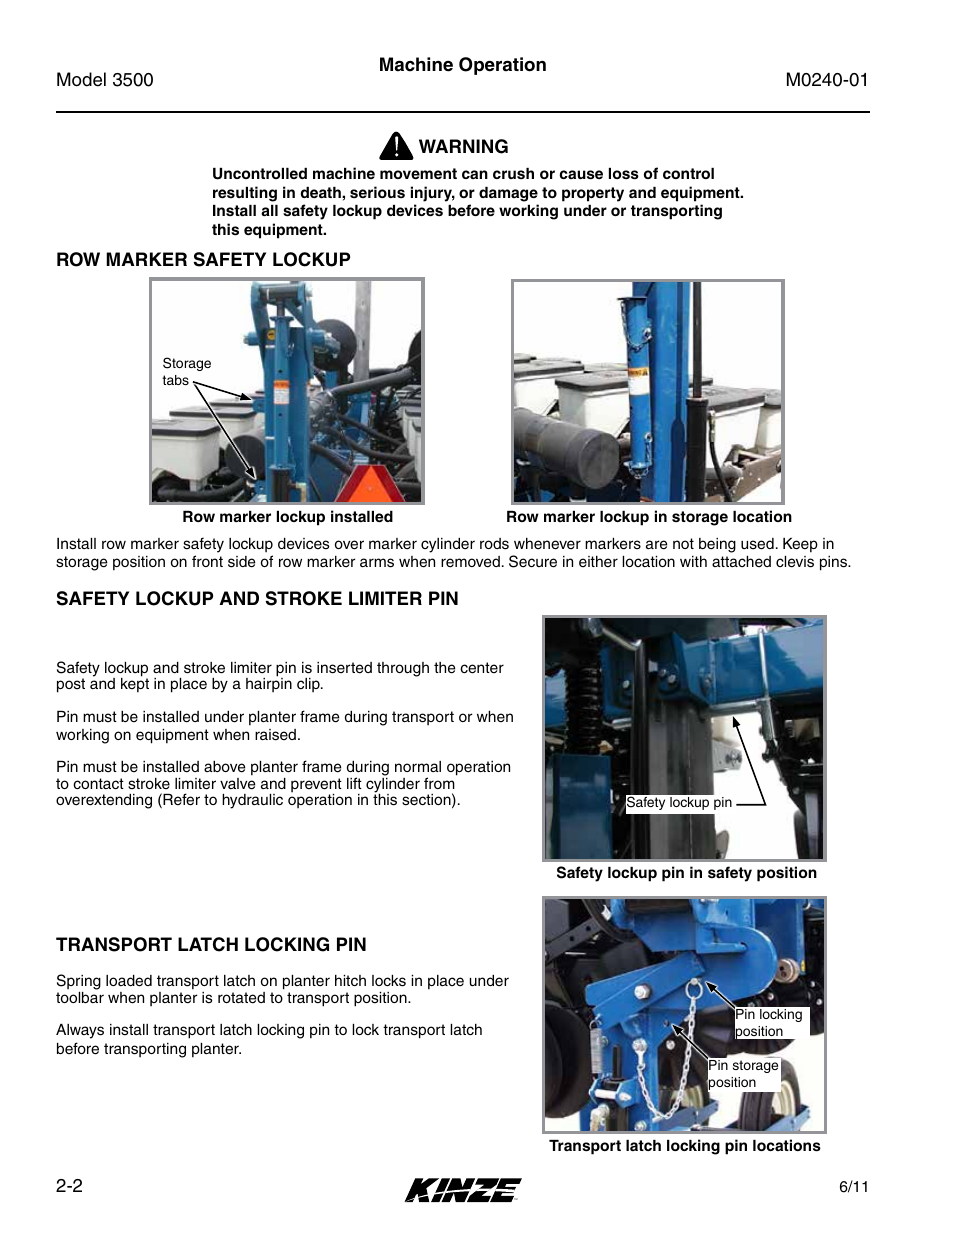 Machine operation, Row marker safety lockup, Safety lockup and stroke limiter pin | Transport latch locking pin, Row marker safety lockup -2, Safety lockup and stroke limiter pin -2, Transport latch locking pin -2 | Kinze 3500 Lift and Rotate Planter Rev. 7/14 User Manual | Page 14 / 140